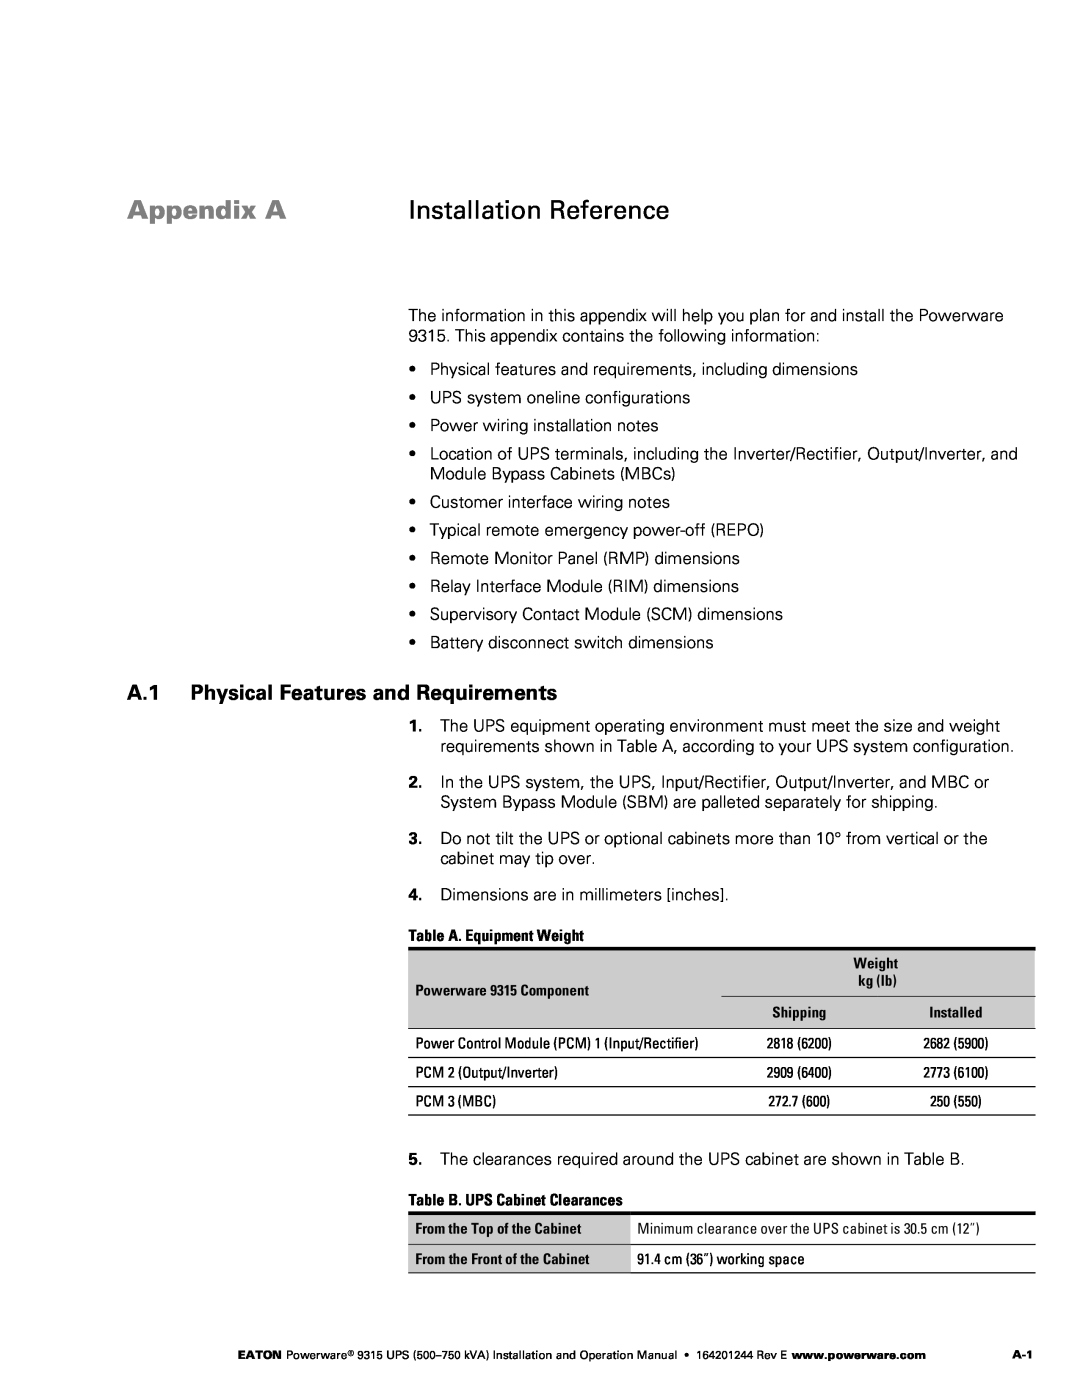 Powerware Powerware 9315 operation manual Appendix A, Installation Reference, A.1 Physical Features and Requirements 